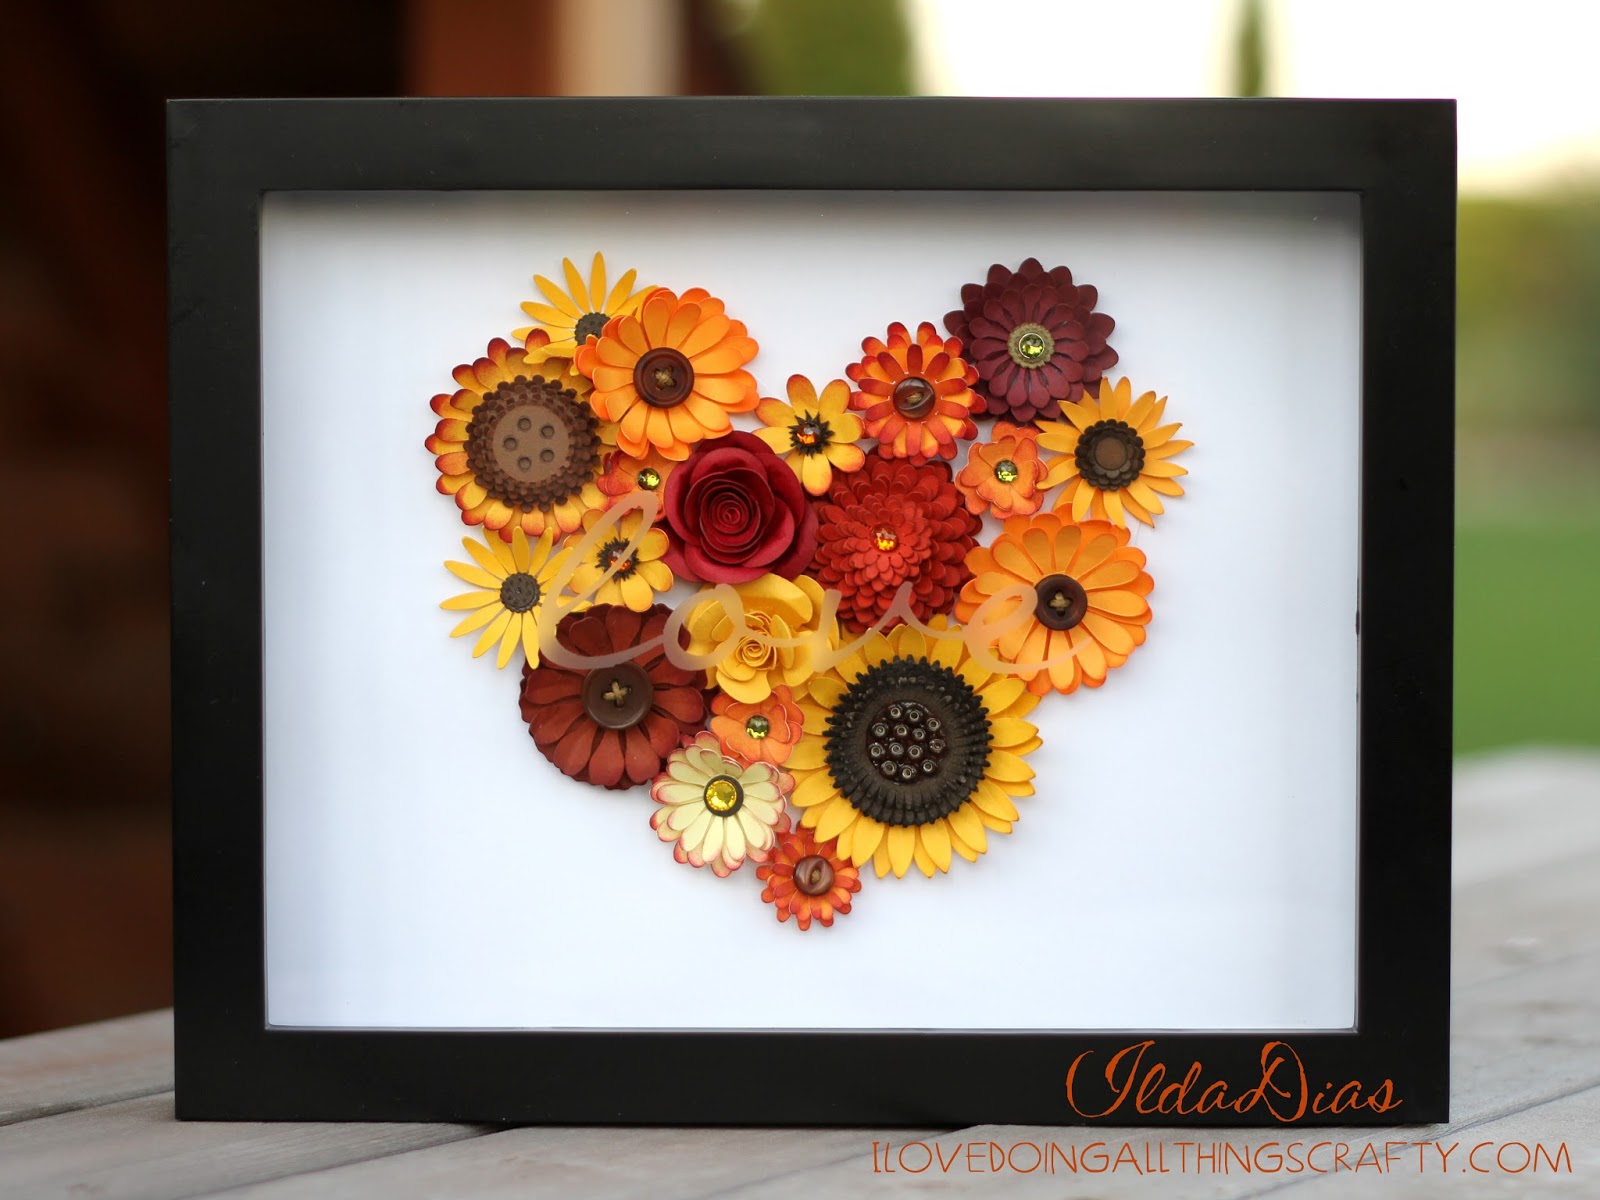 I Love Doing All Things Crafty: Autumn "love" Flower Shadow Box